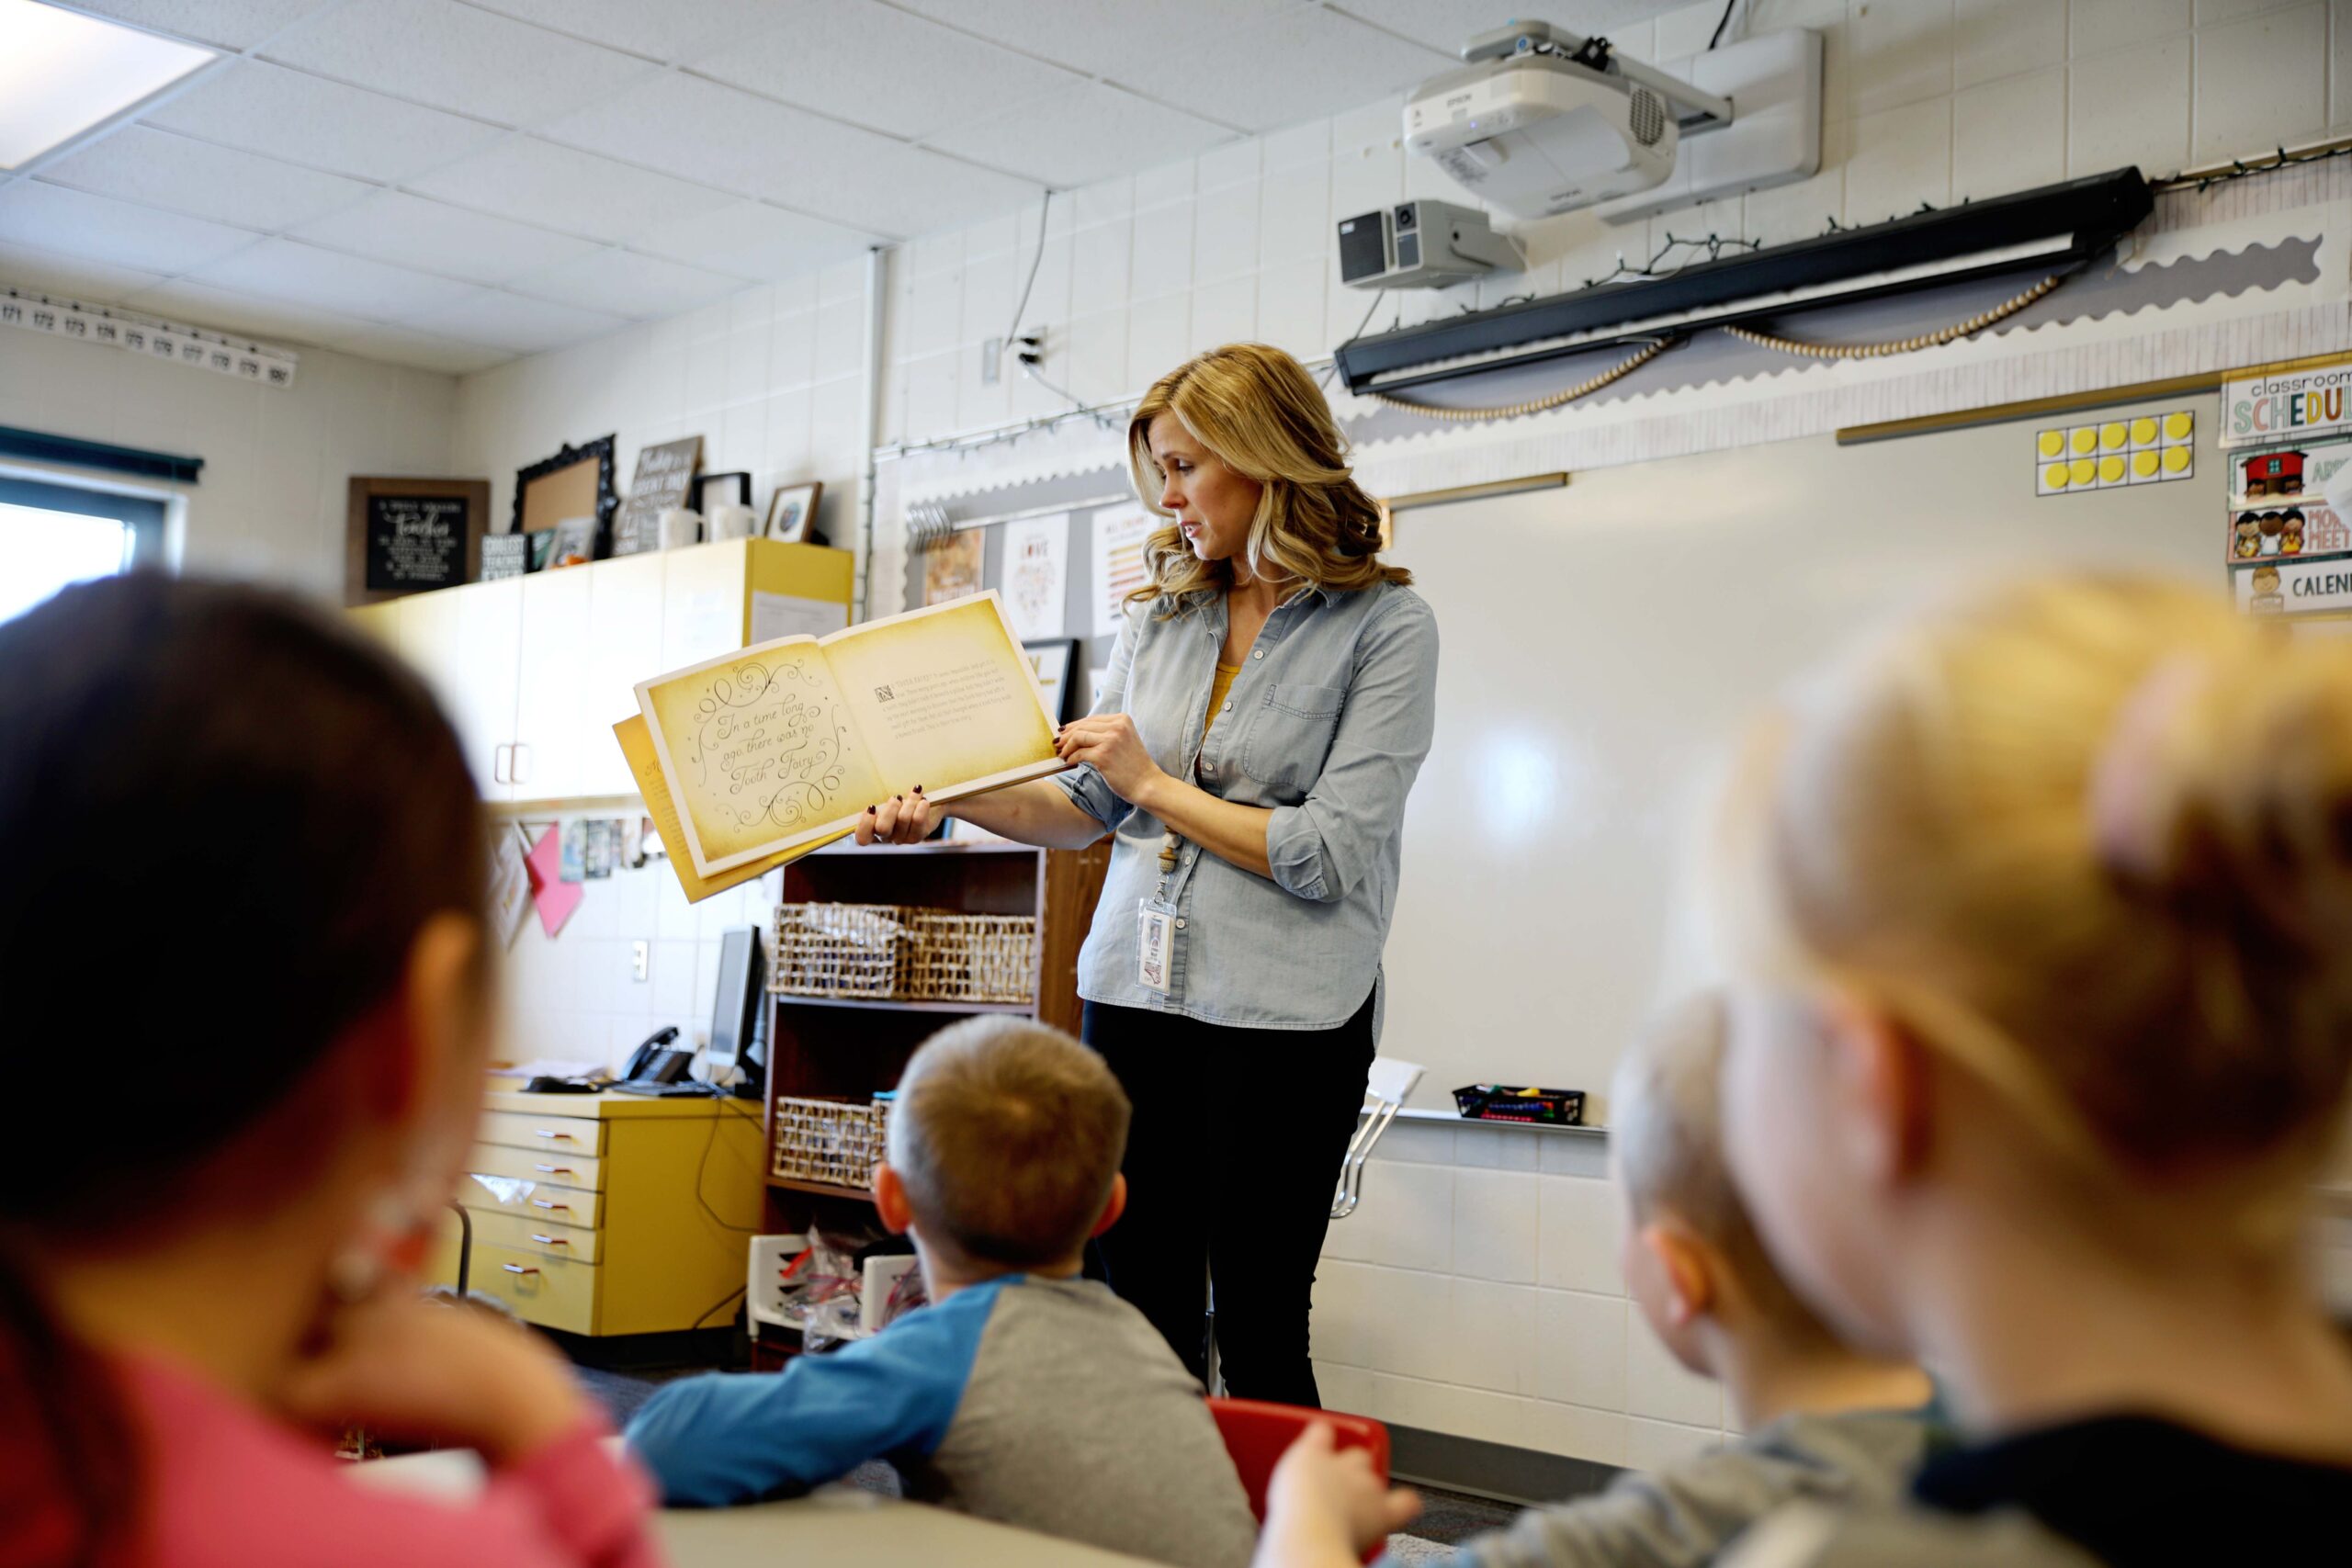 Clarke University Master of Arts in Education student teaching in own classroom.